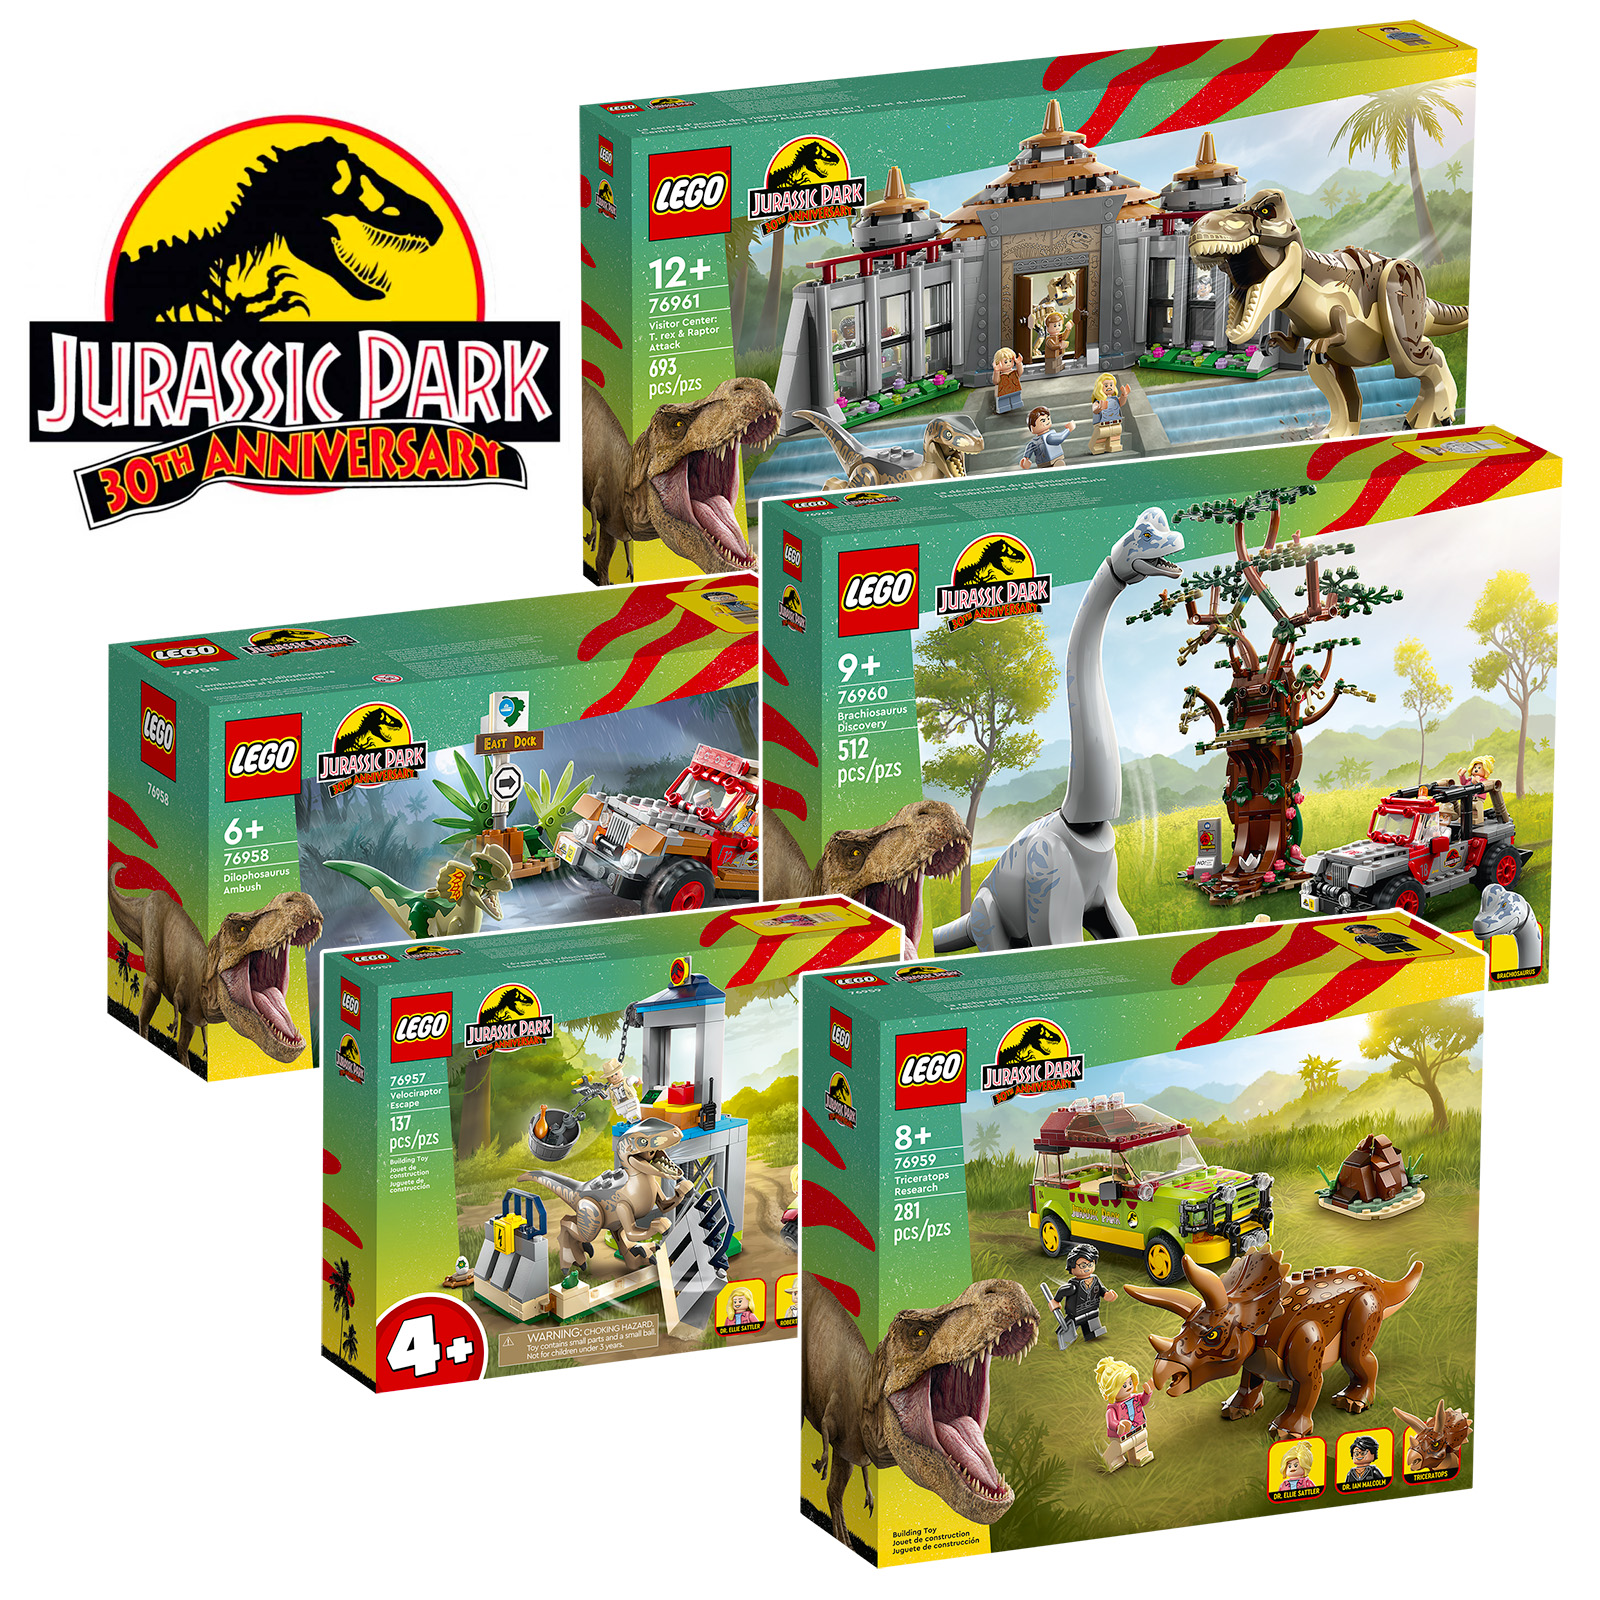 ▻ New LEGO Jurassic Park releases: five sets to celebrate the franchise's  30th anniversary - HOTH BRICKS